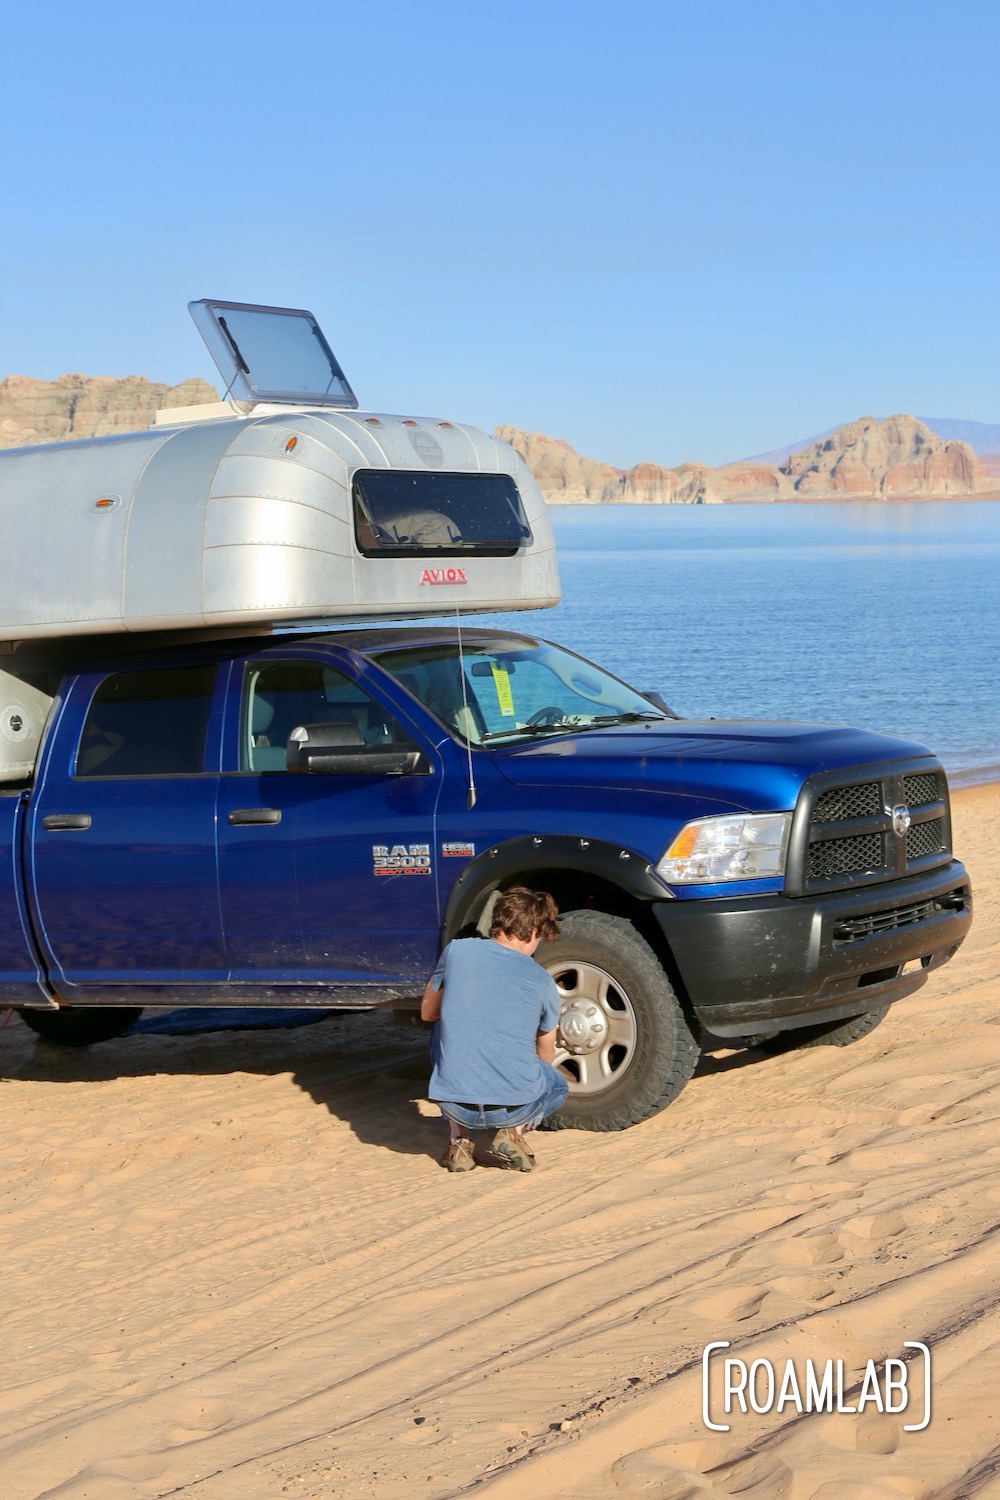 Airing down the tires of a truck camper when driving on the sand.